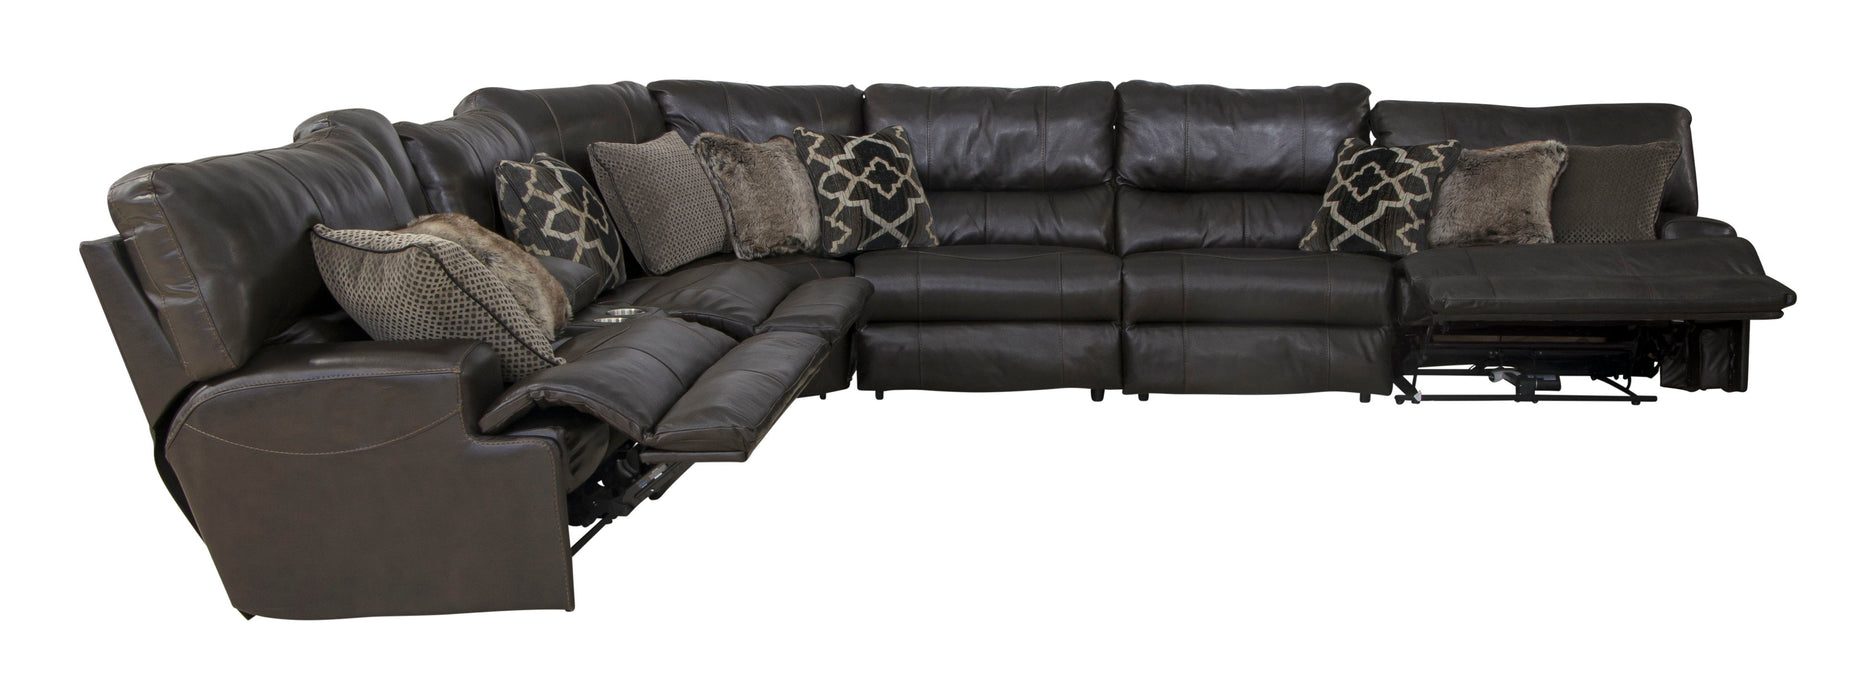 Como - Italian Leather Match Reclining Sectional